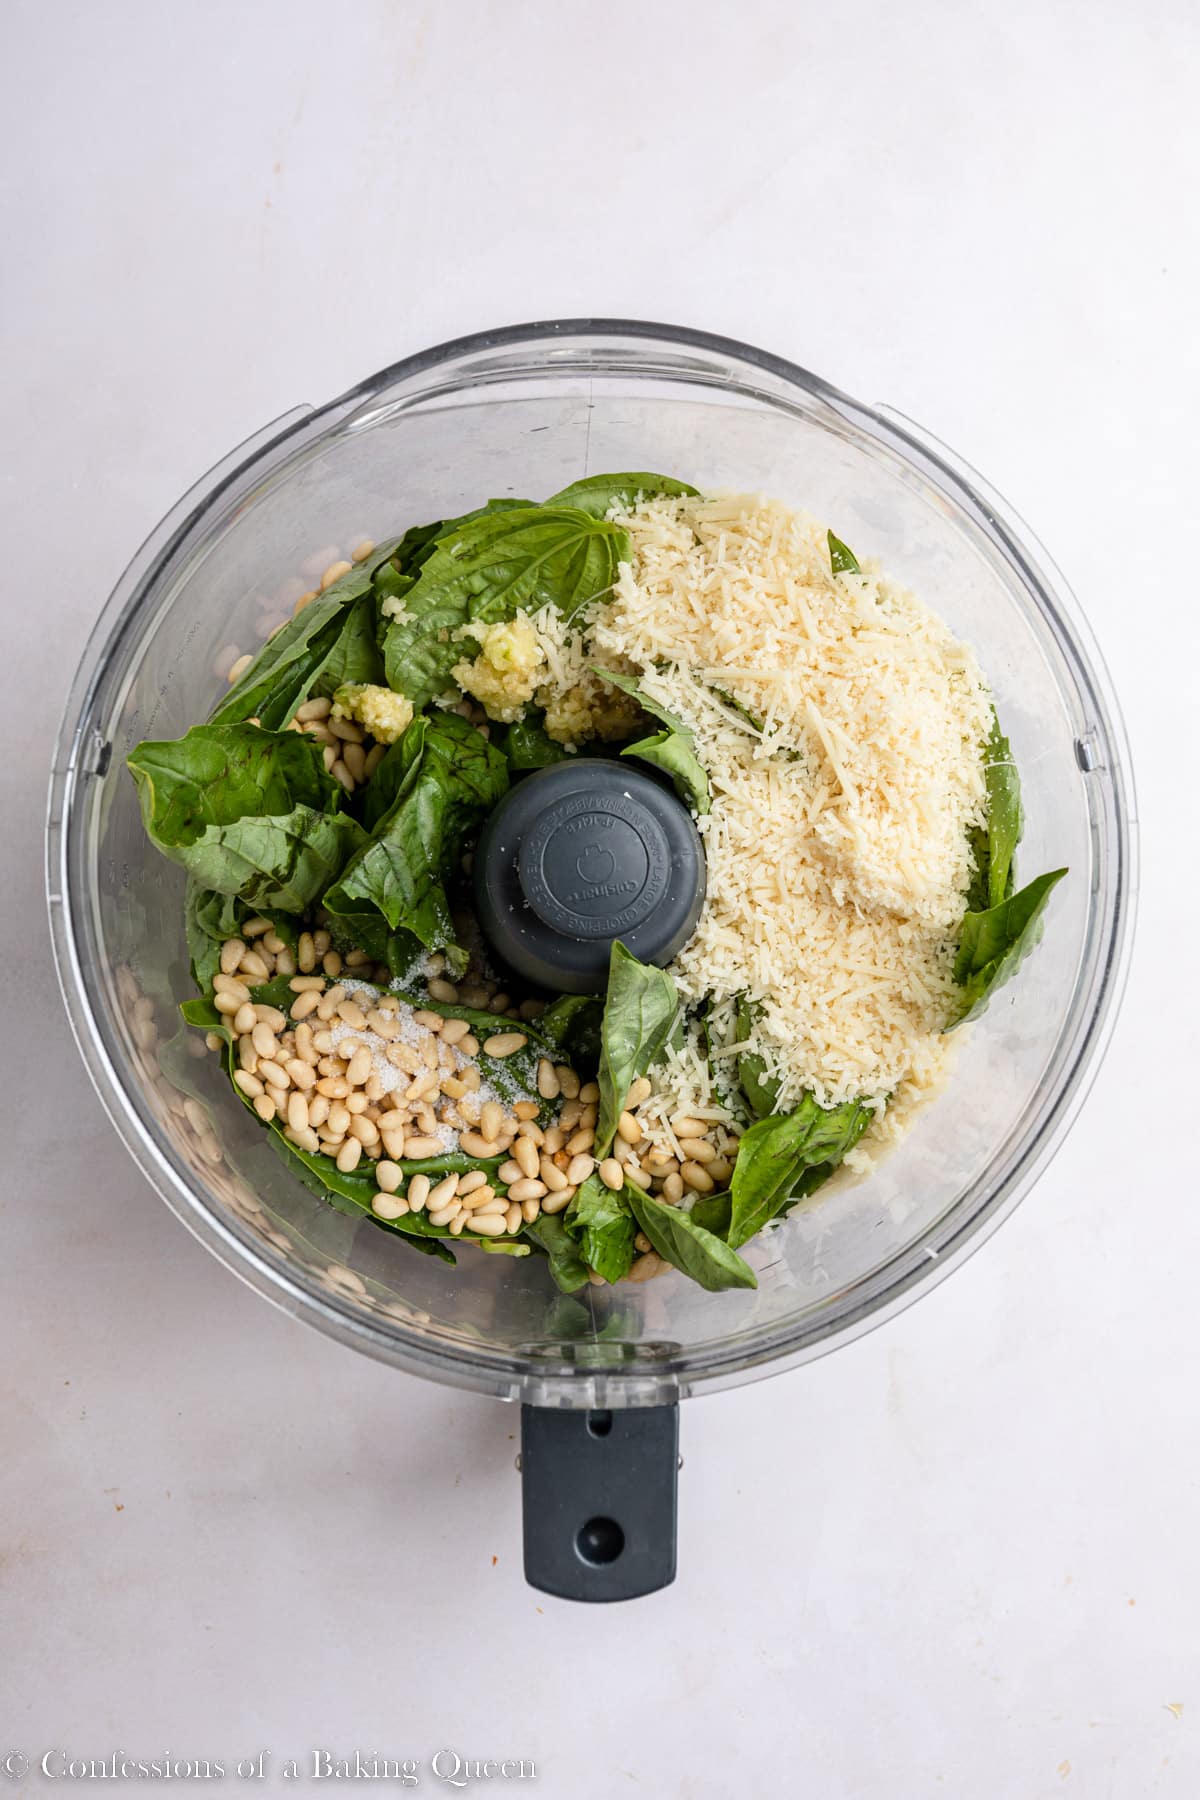 basil, pine nuts, garlic, salt, and parmsean cheese in a food processor on a light surface